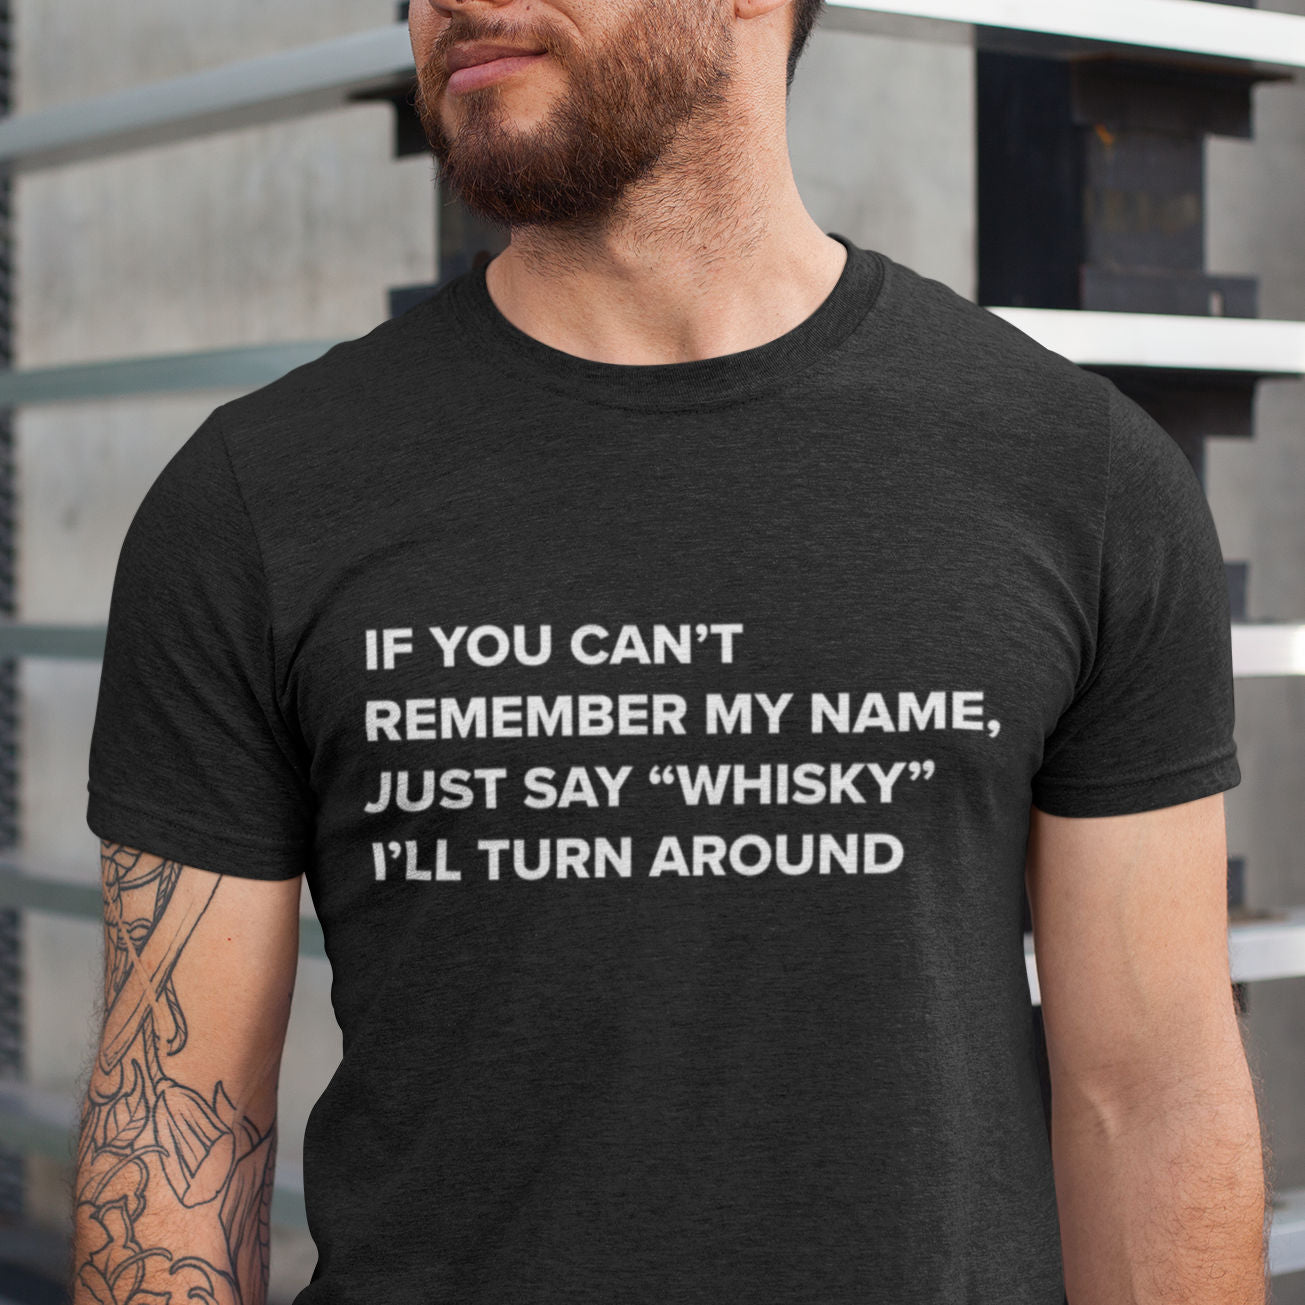 If you can't remember my name say whisky t-shirt for whisky drinker